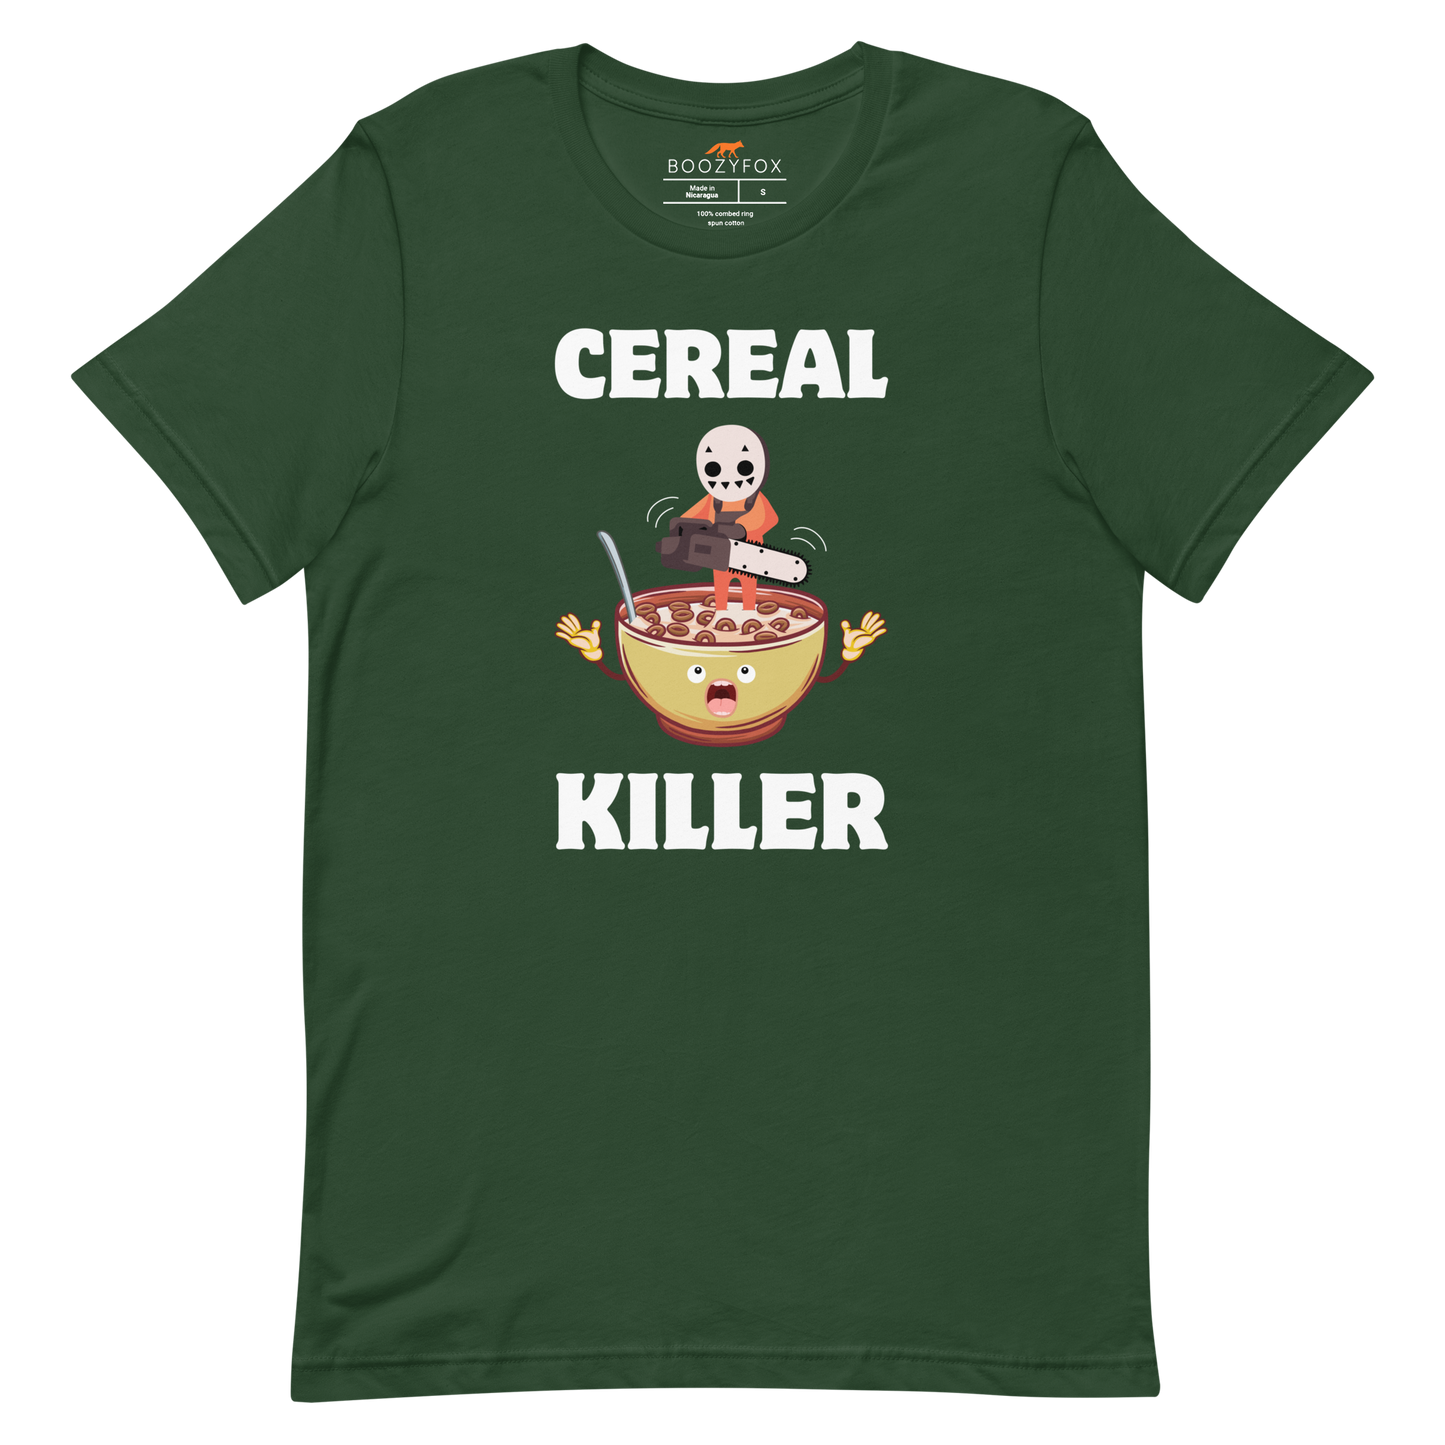 Forest Green Premium Cereal Killer Tee featuring a Cereal Killer graphic on the chest - Funny Graphic Tees - Boozy Fox